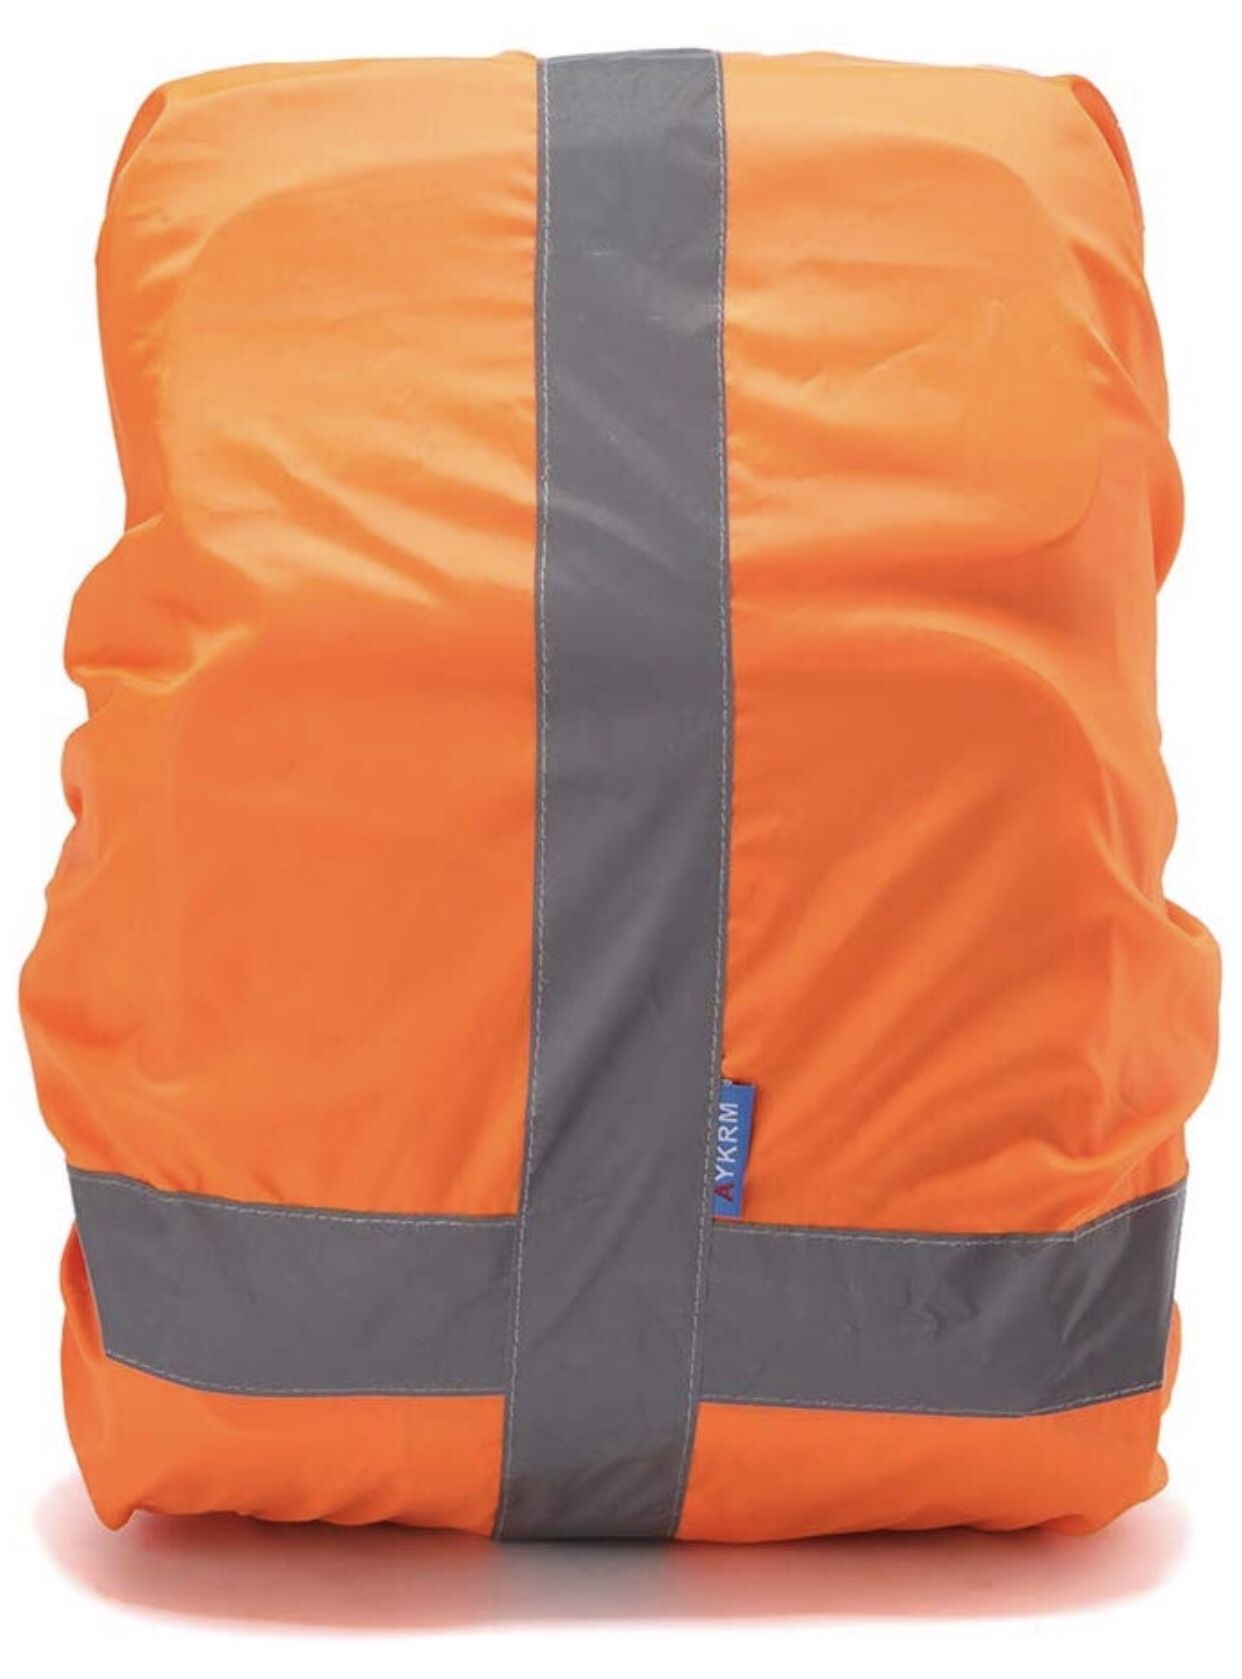 SAFETY 3M Reflective Backpack Cover, Rucksack Cover, Bag Rain Cover, High Visibility, Waterproof, Rainproof, Ideal for Cycling and Running